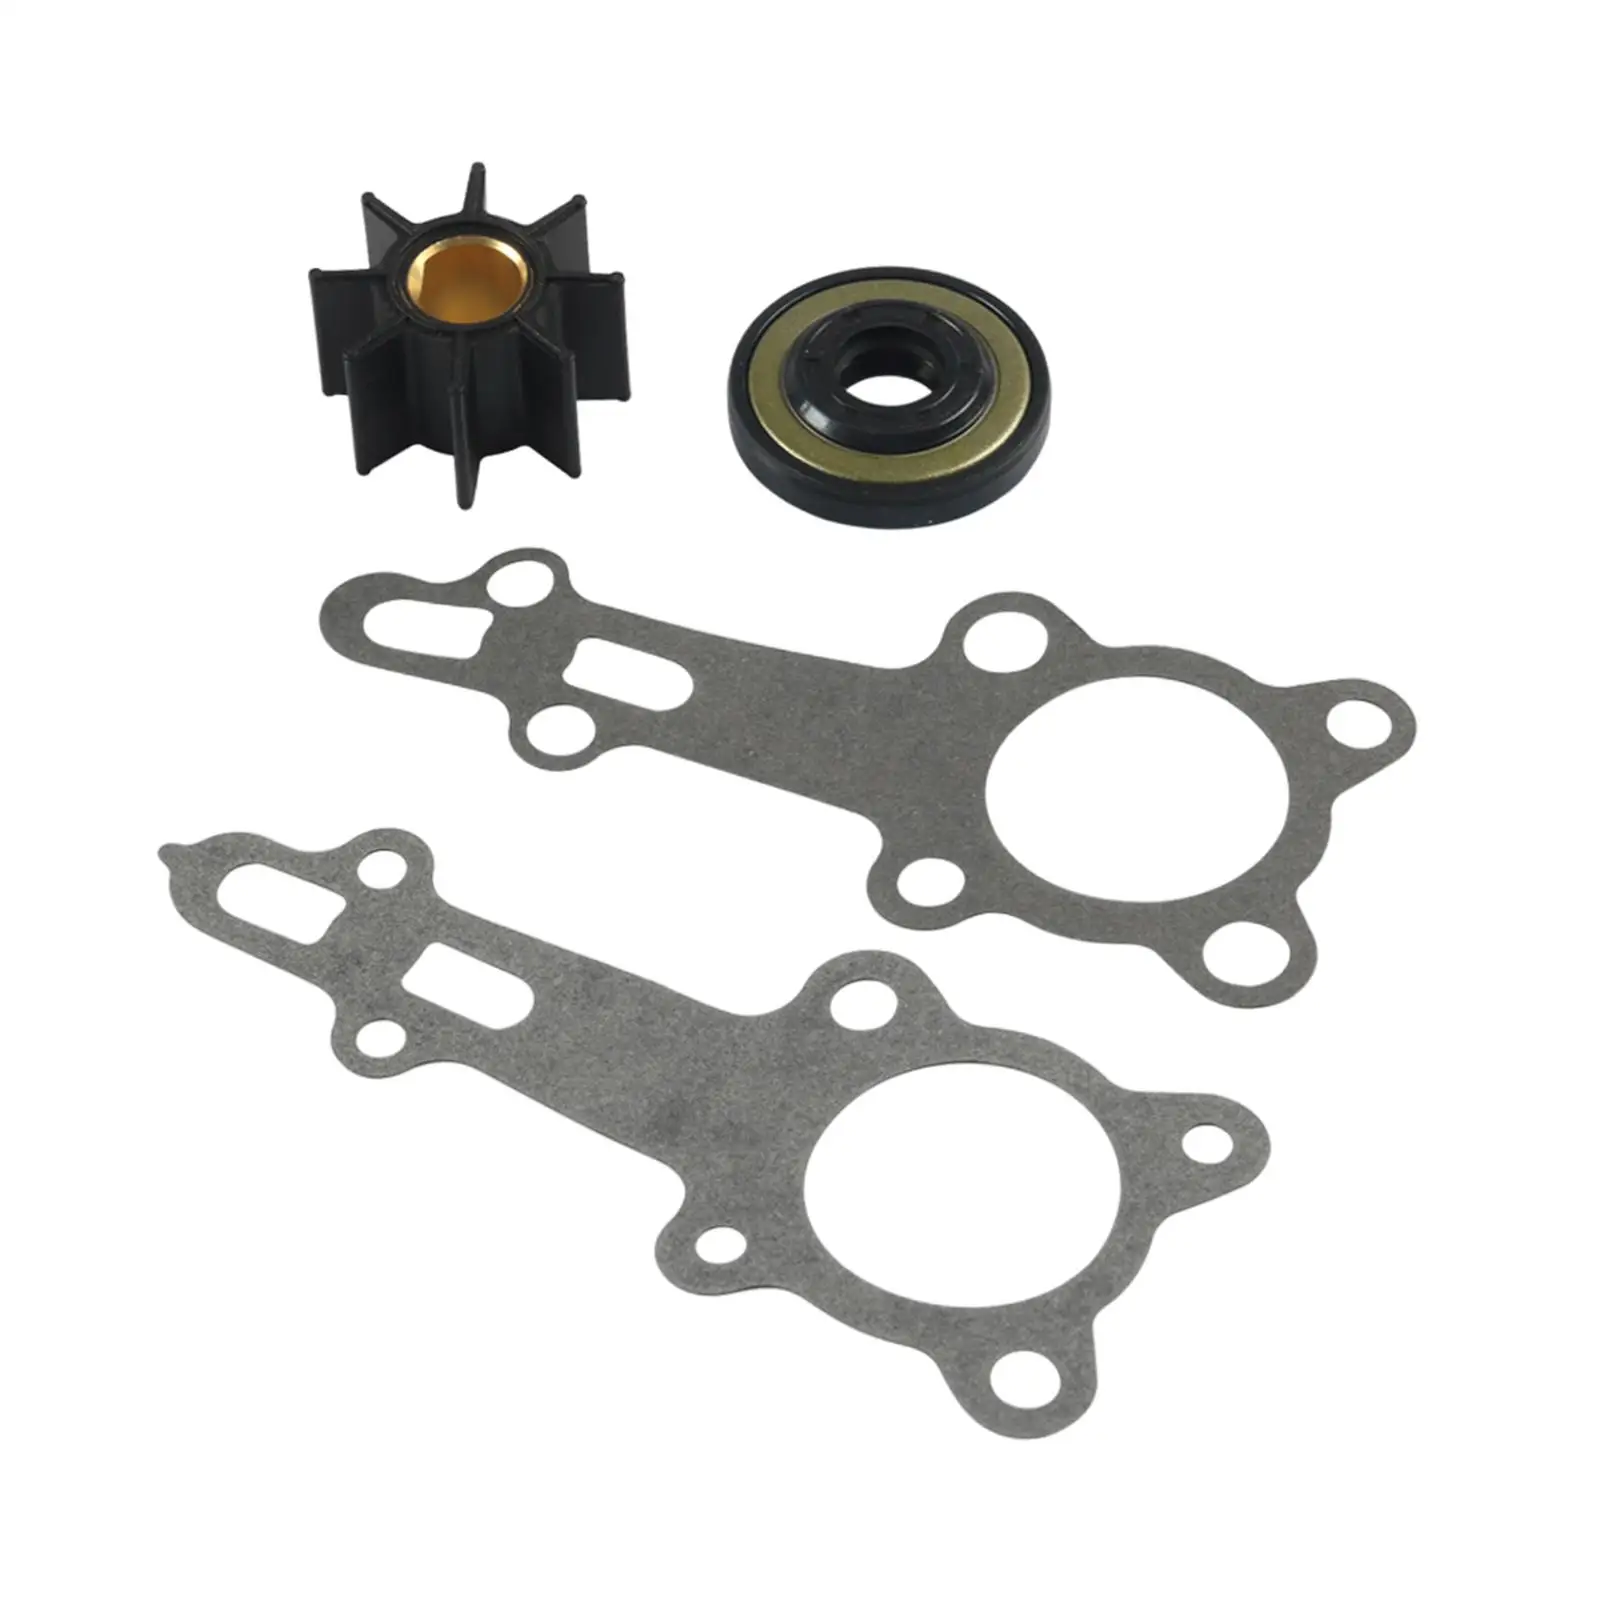 Water Pump Impeller Repair Kit 06192-881-c00 Stable Performance Marine Outboard Spare Parts for Honda 7.5HP BF6D BF6B 6HP